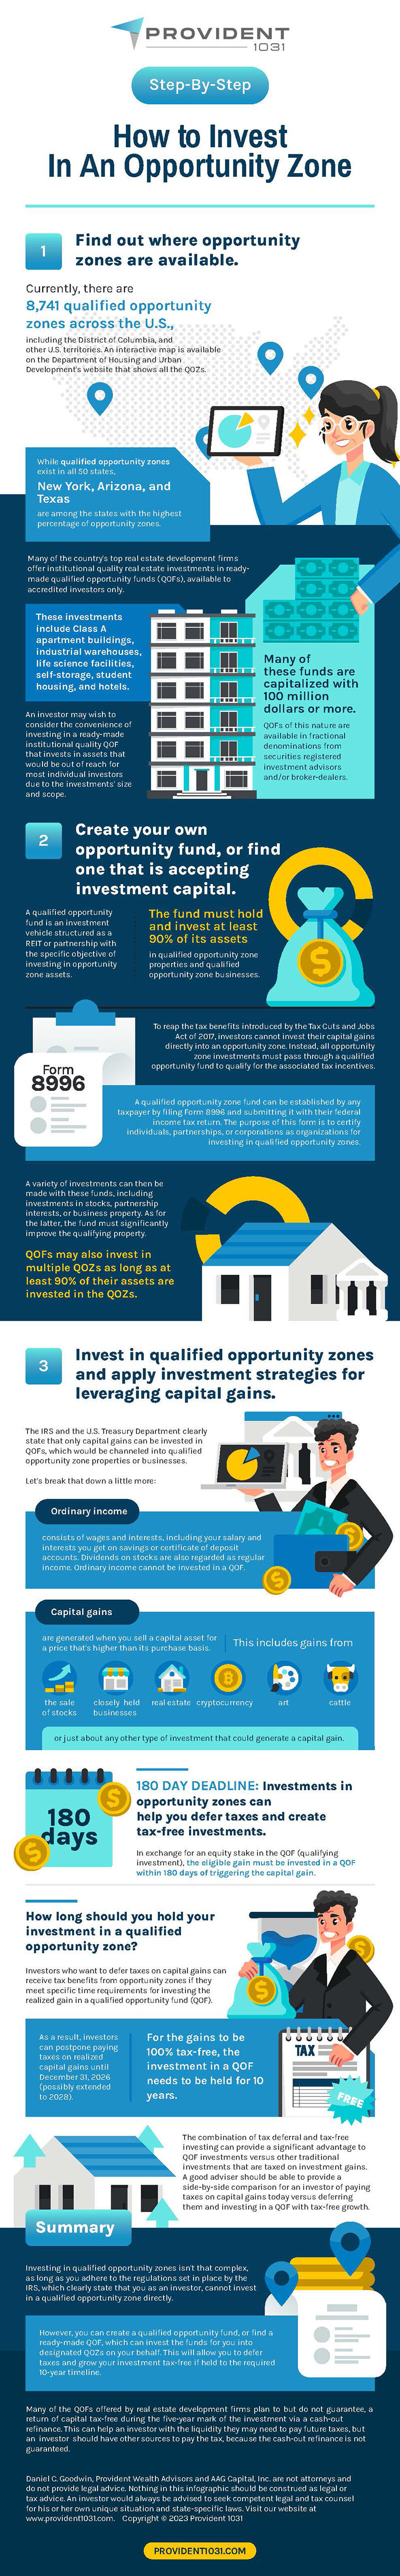 How To Invest In An Opportunity Zone - Provident 1031